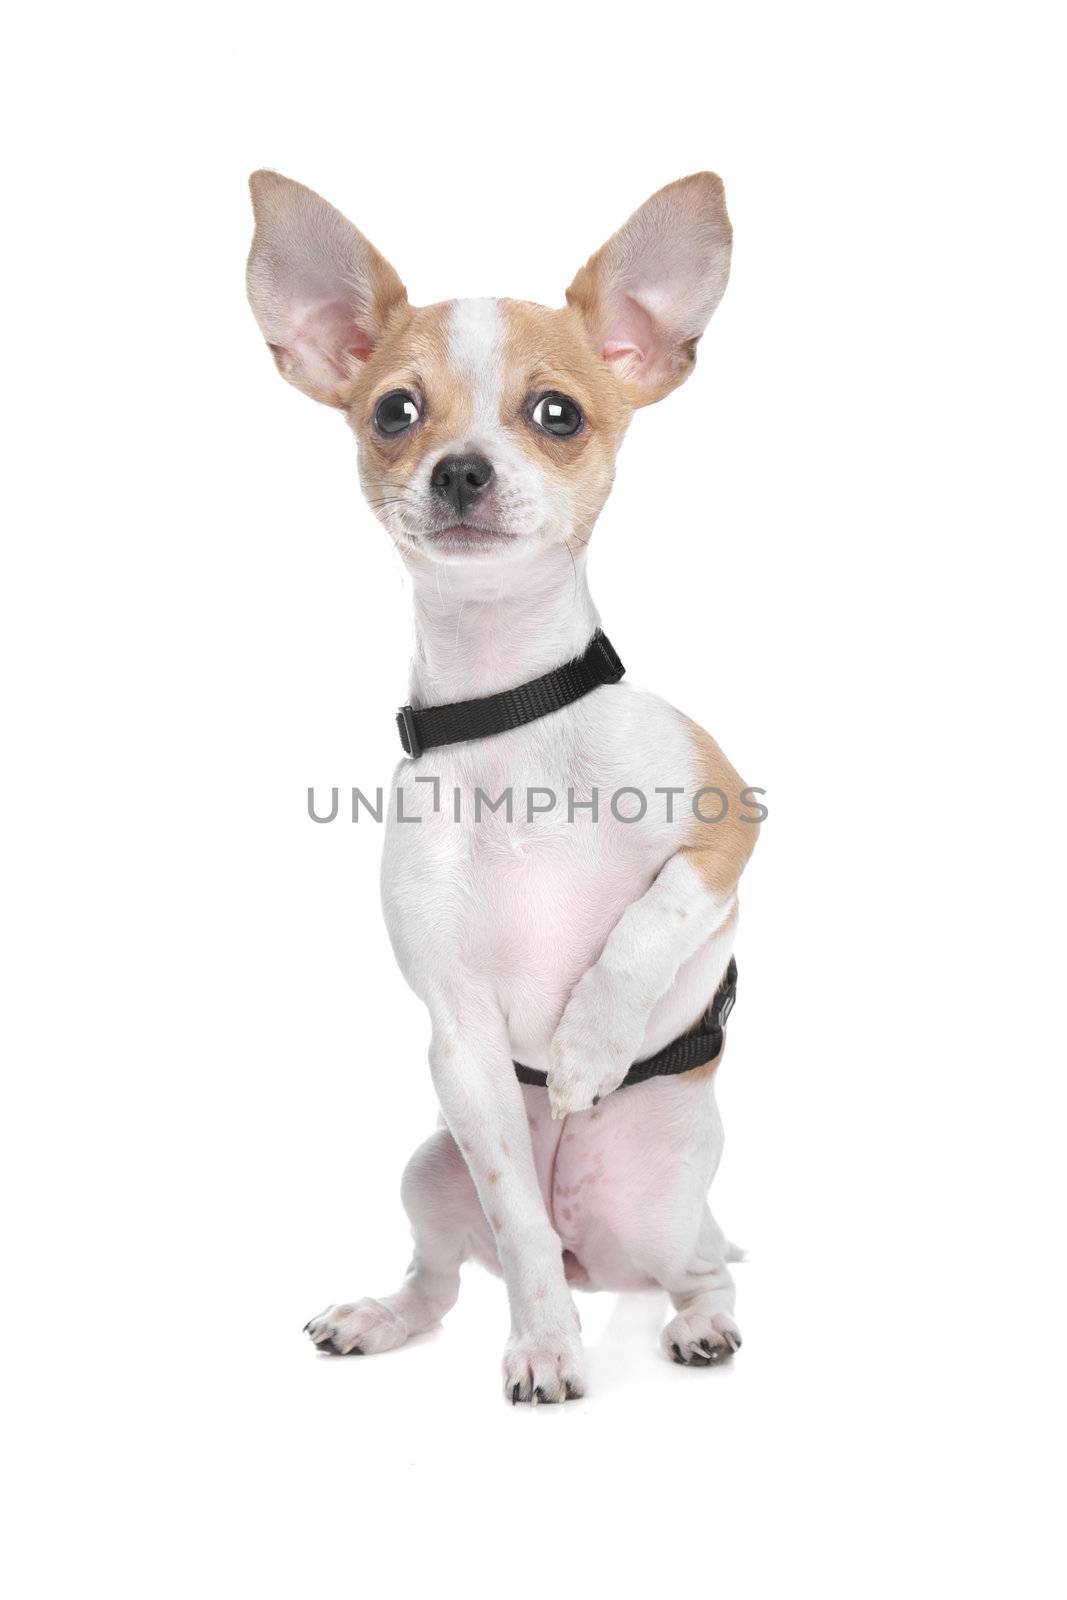 Short haired chihuahua in front of a white background